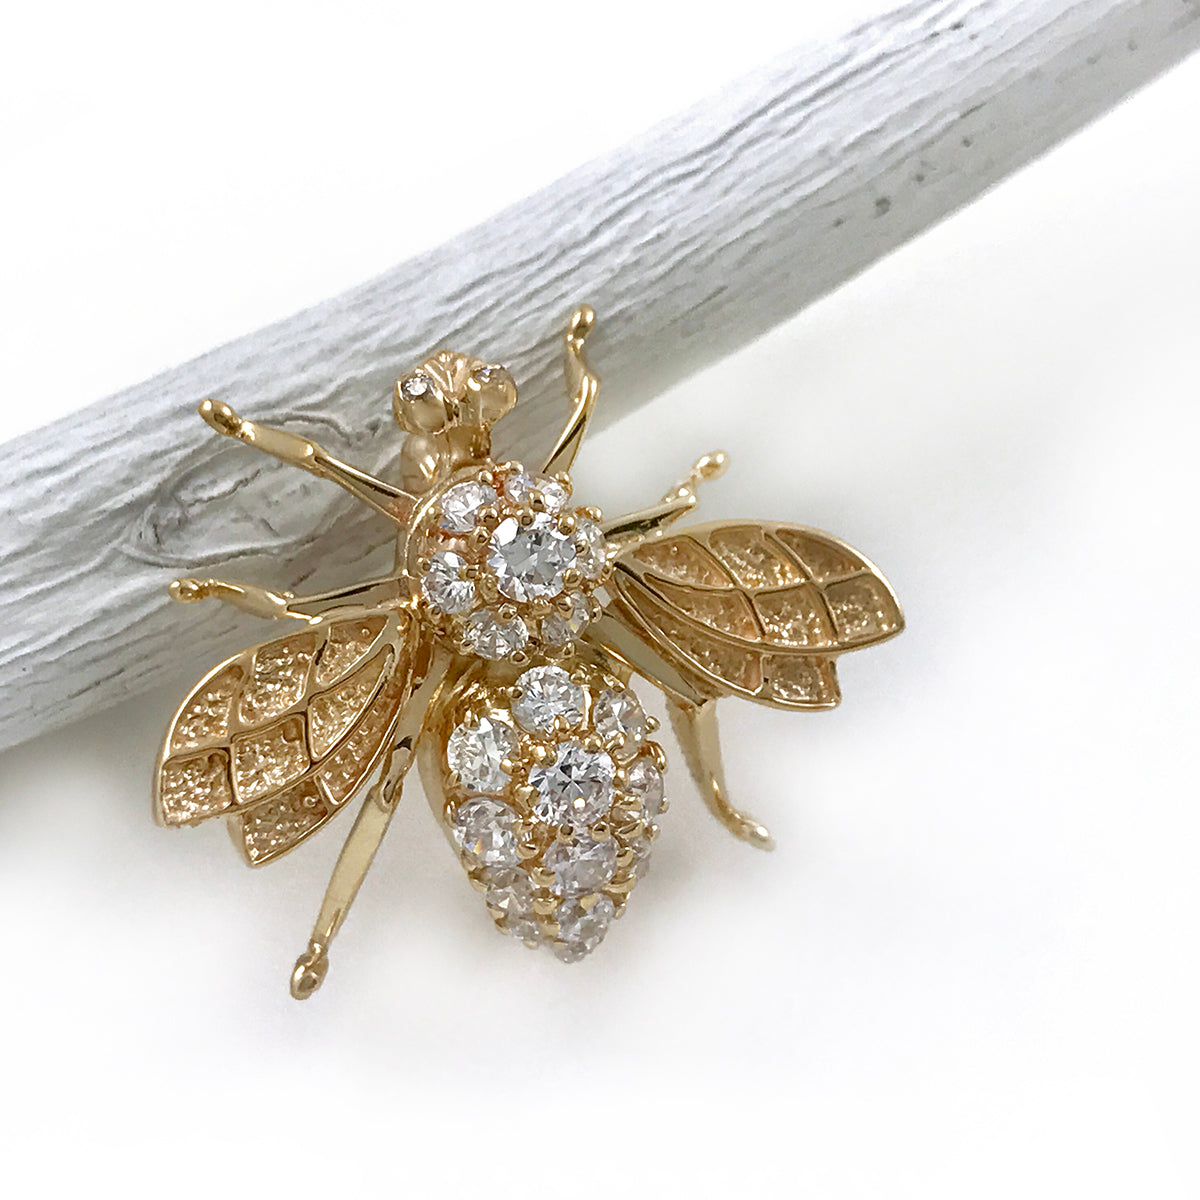 Beaded brooch bee with crown, gold bee brooch pin - Inspire Uplift